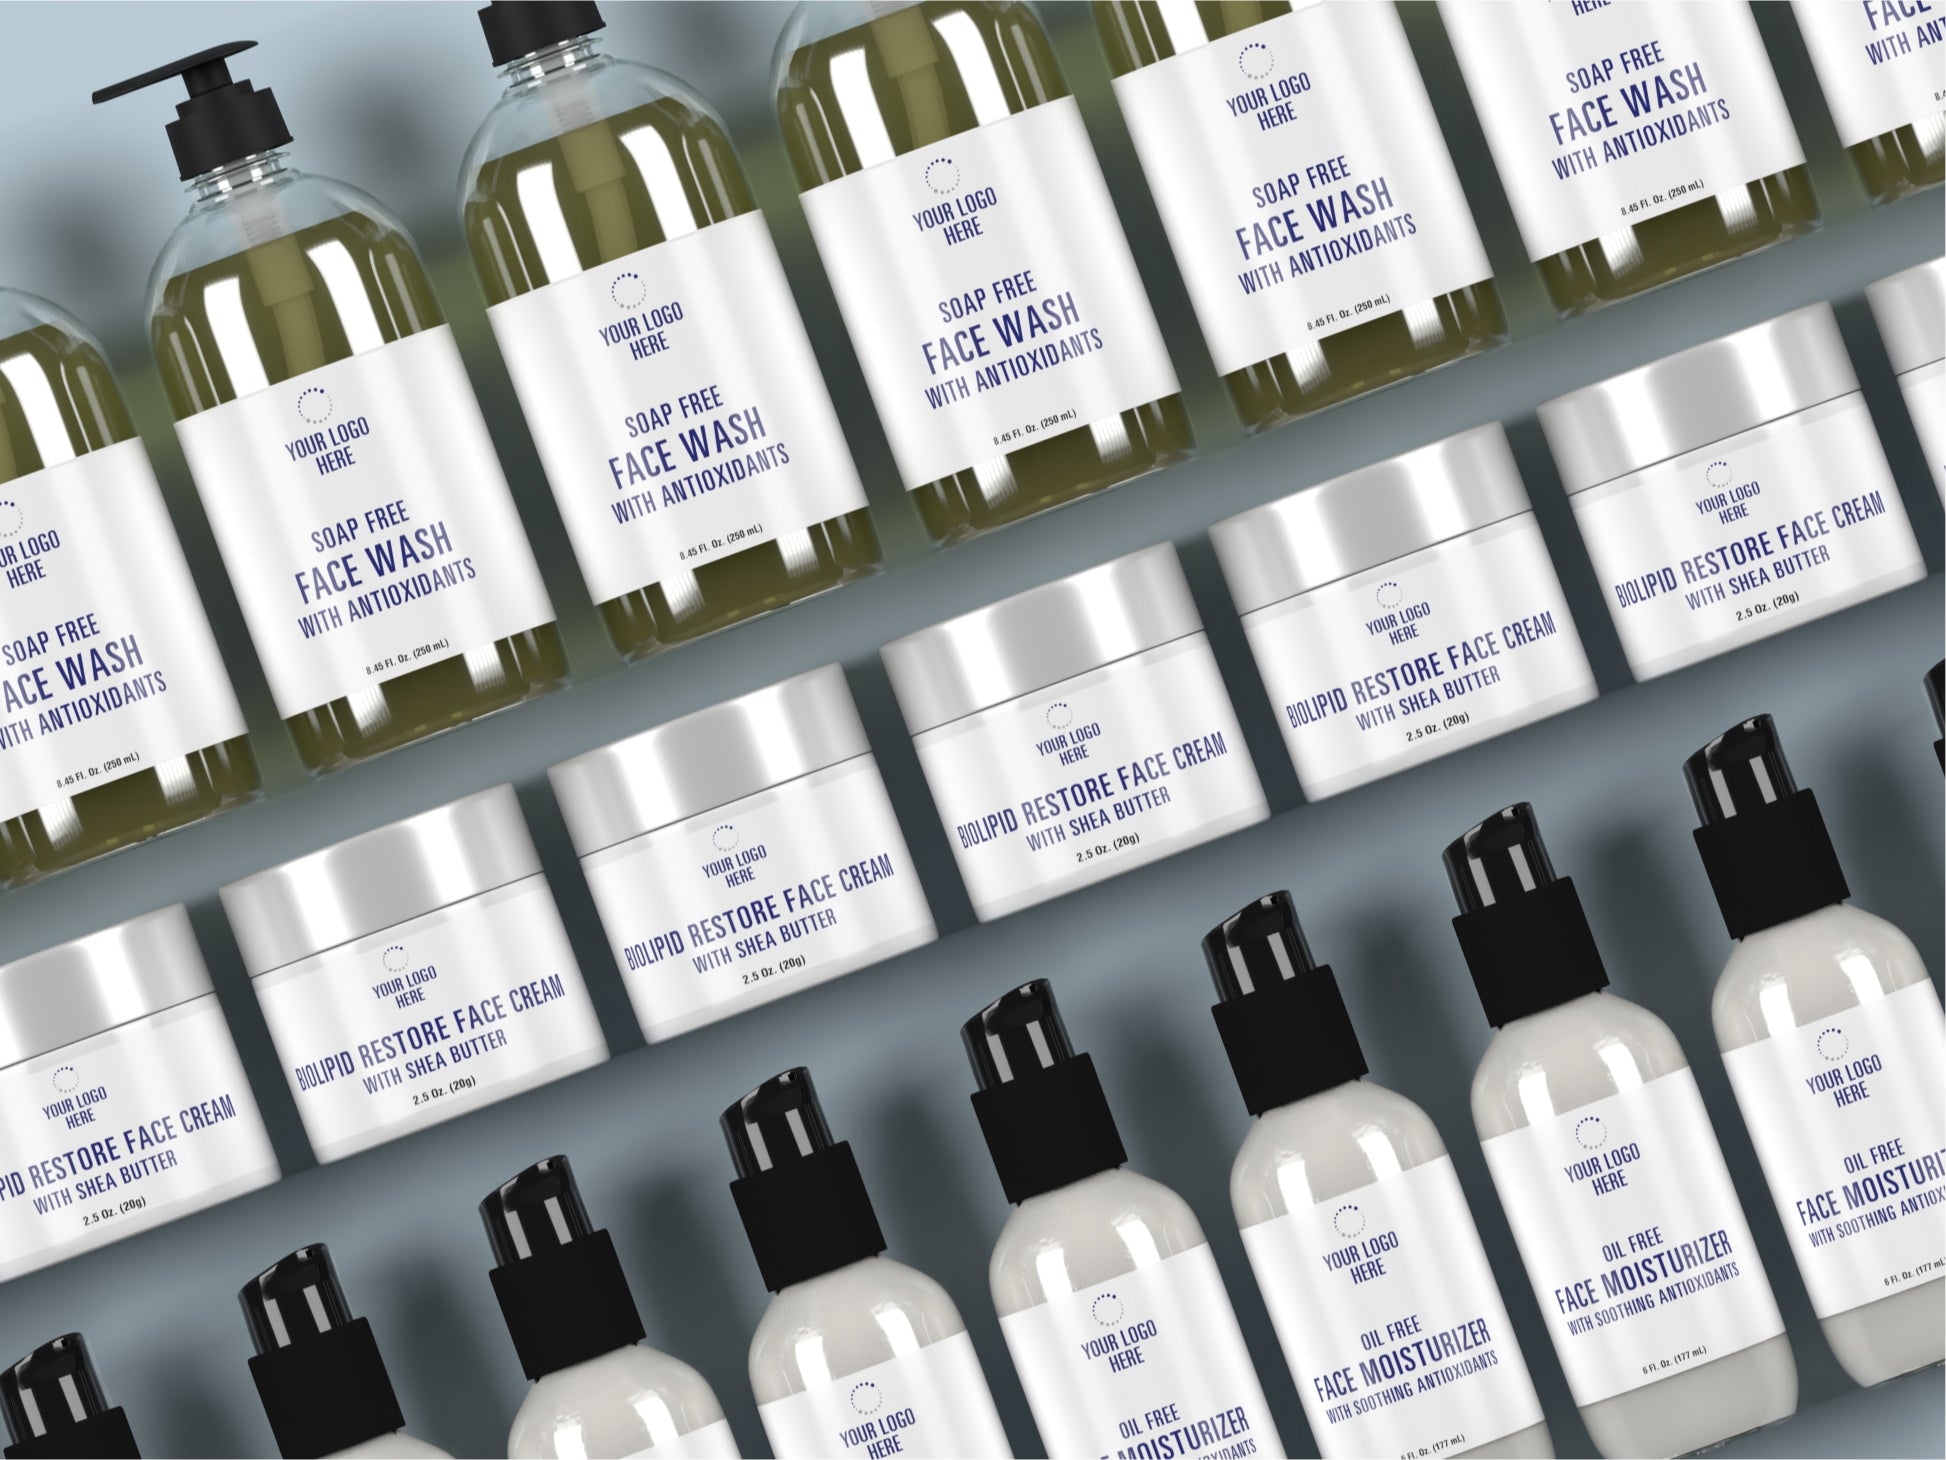 A rendering of of a variety of white label skincare products arranged in rows showing the example "Your Logo Here" labels